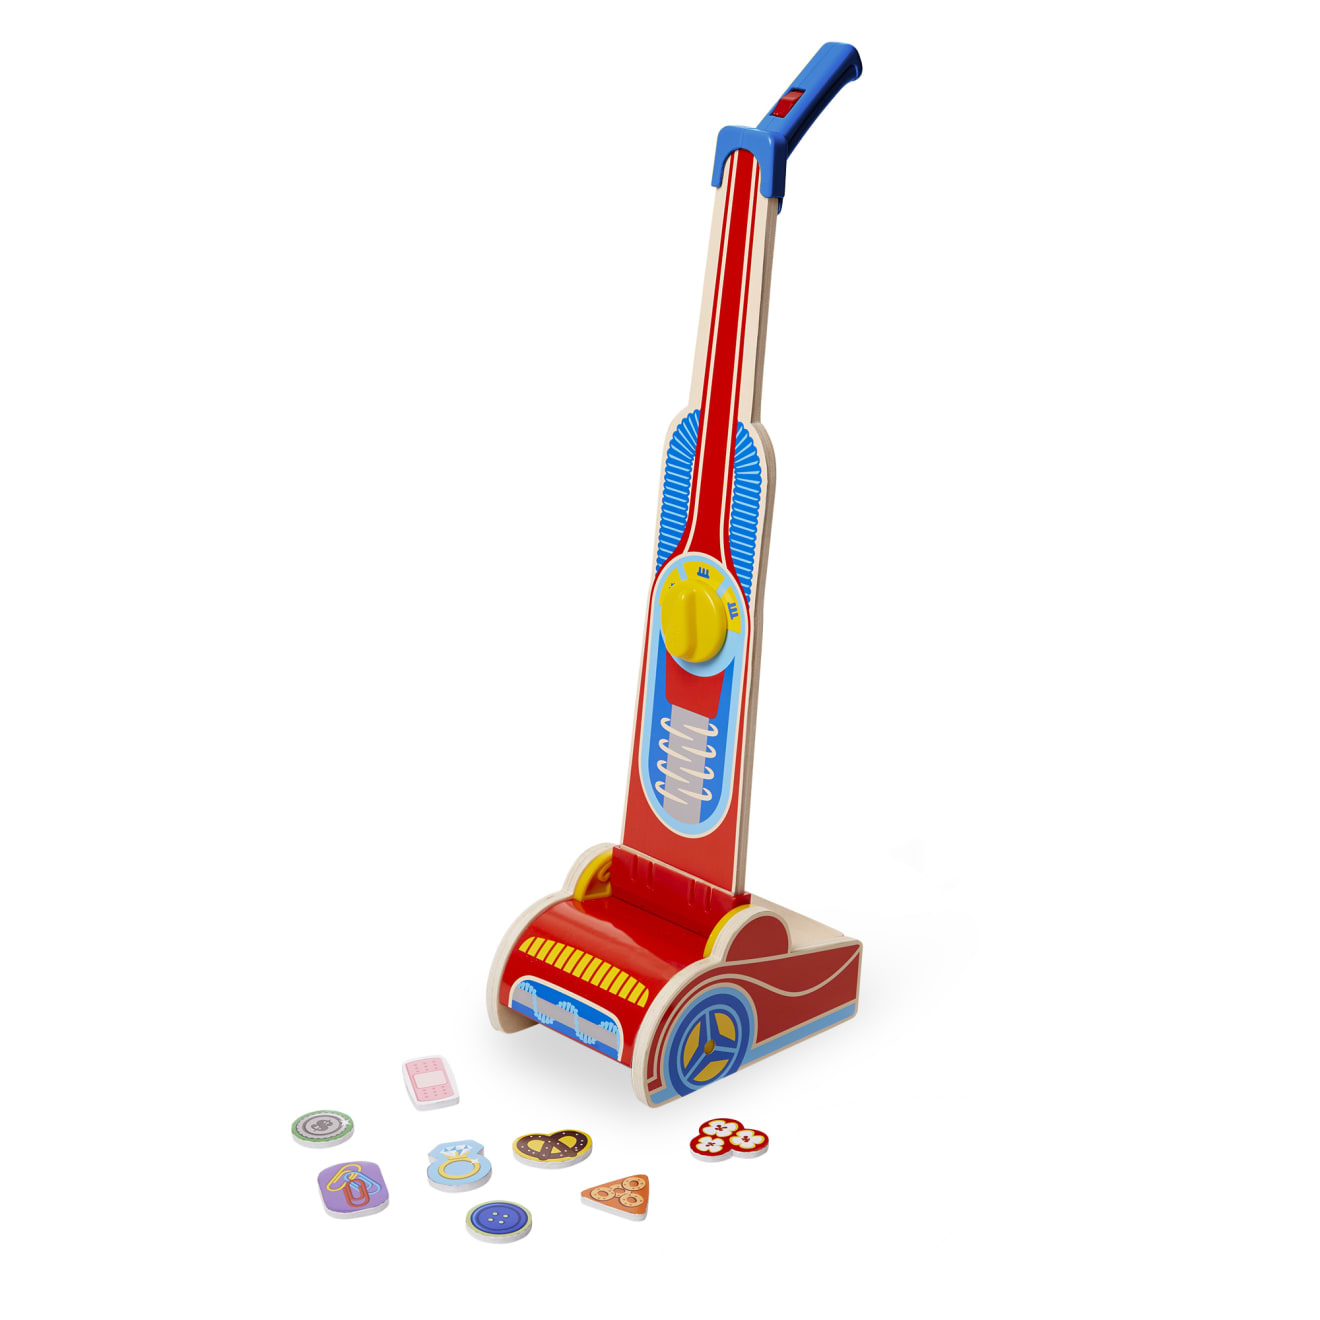 Lego Duplo VACUUM CLEANER SWEEPER HOOVER MACHINE TOY House